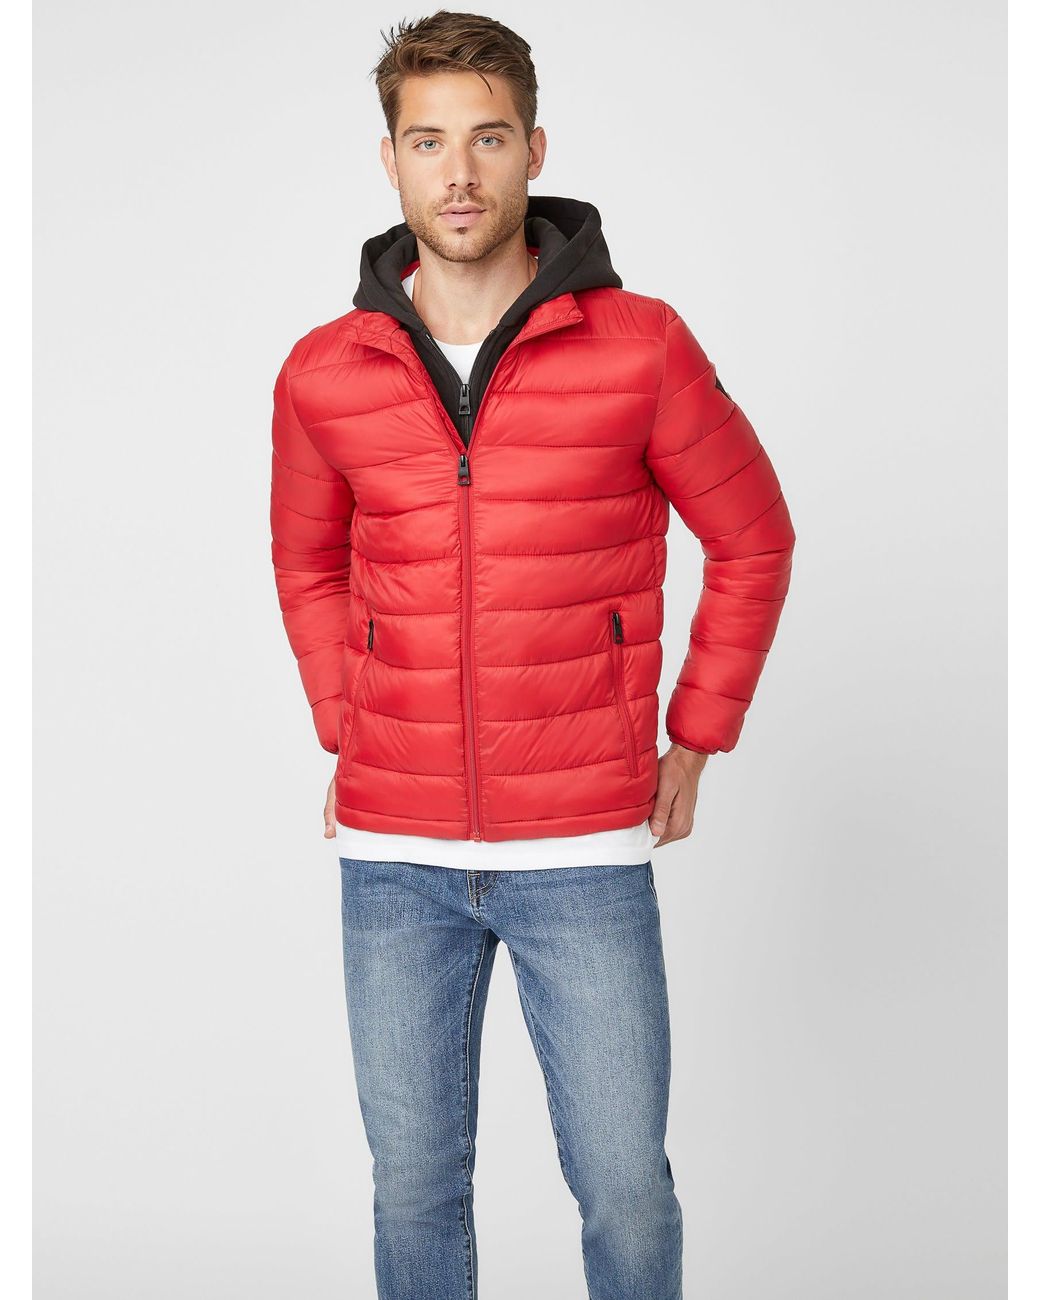 Guess Factory Hampton Puffer Jacket in Red for Men | Lyst